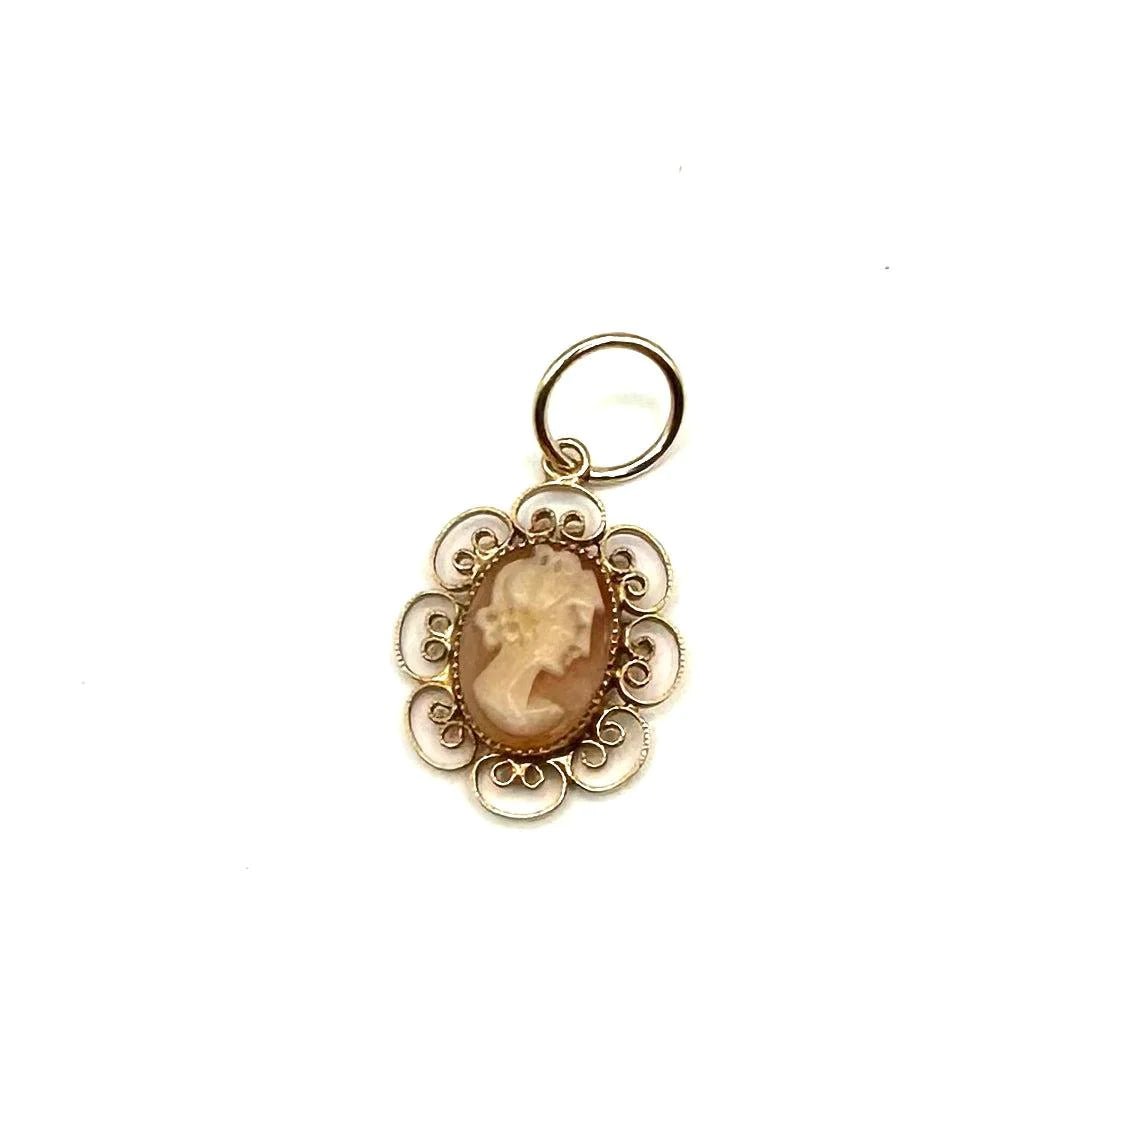 Vintage Cameo Charm - Something about Sofia